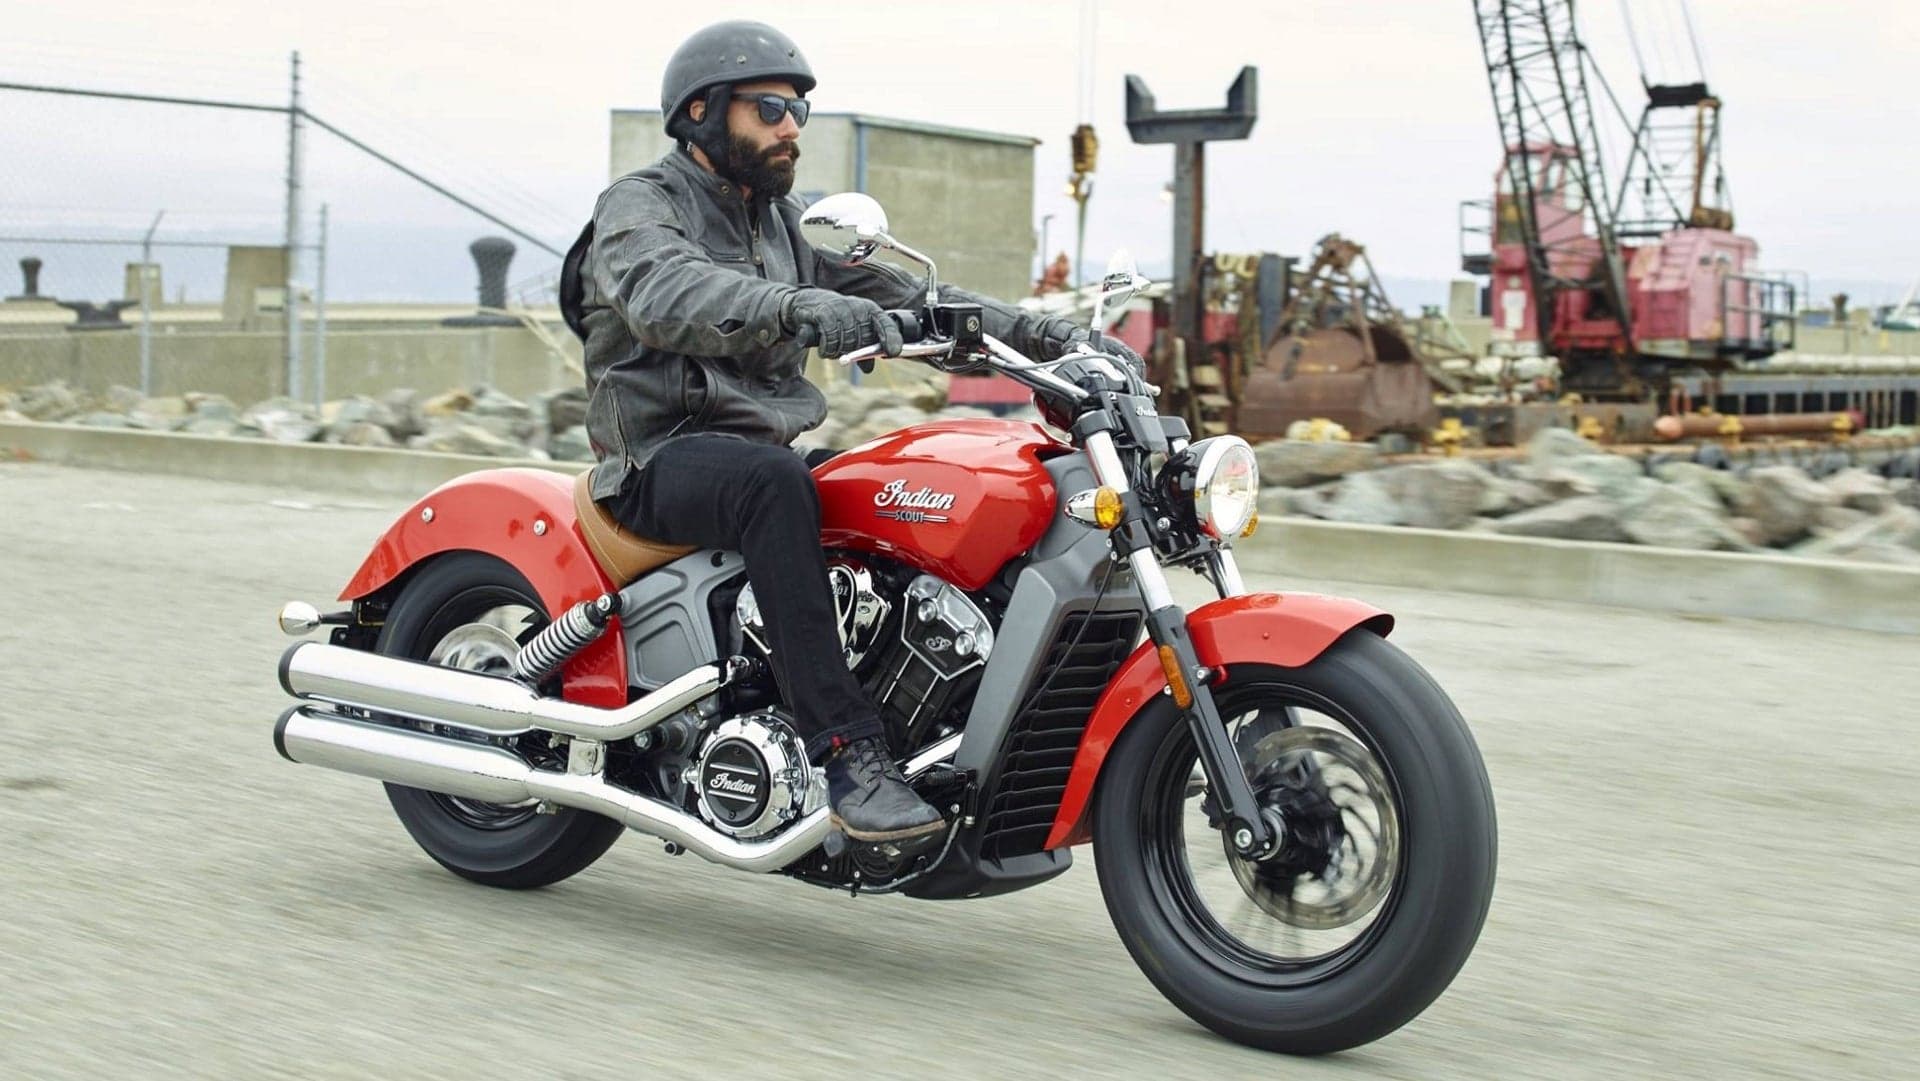 2017-2018 Indian Scouts Recalled for Potential Braking Issue